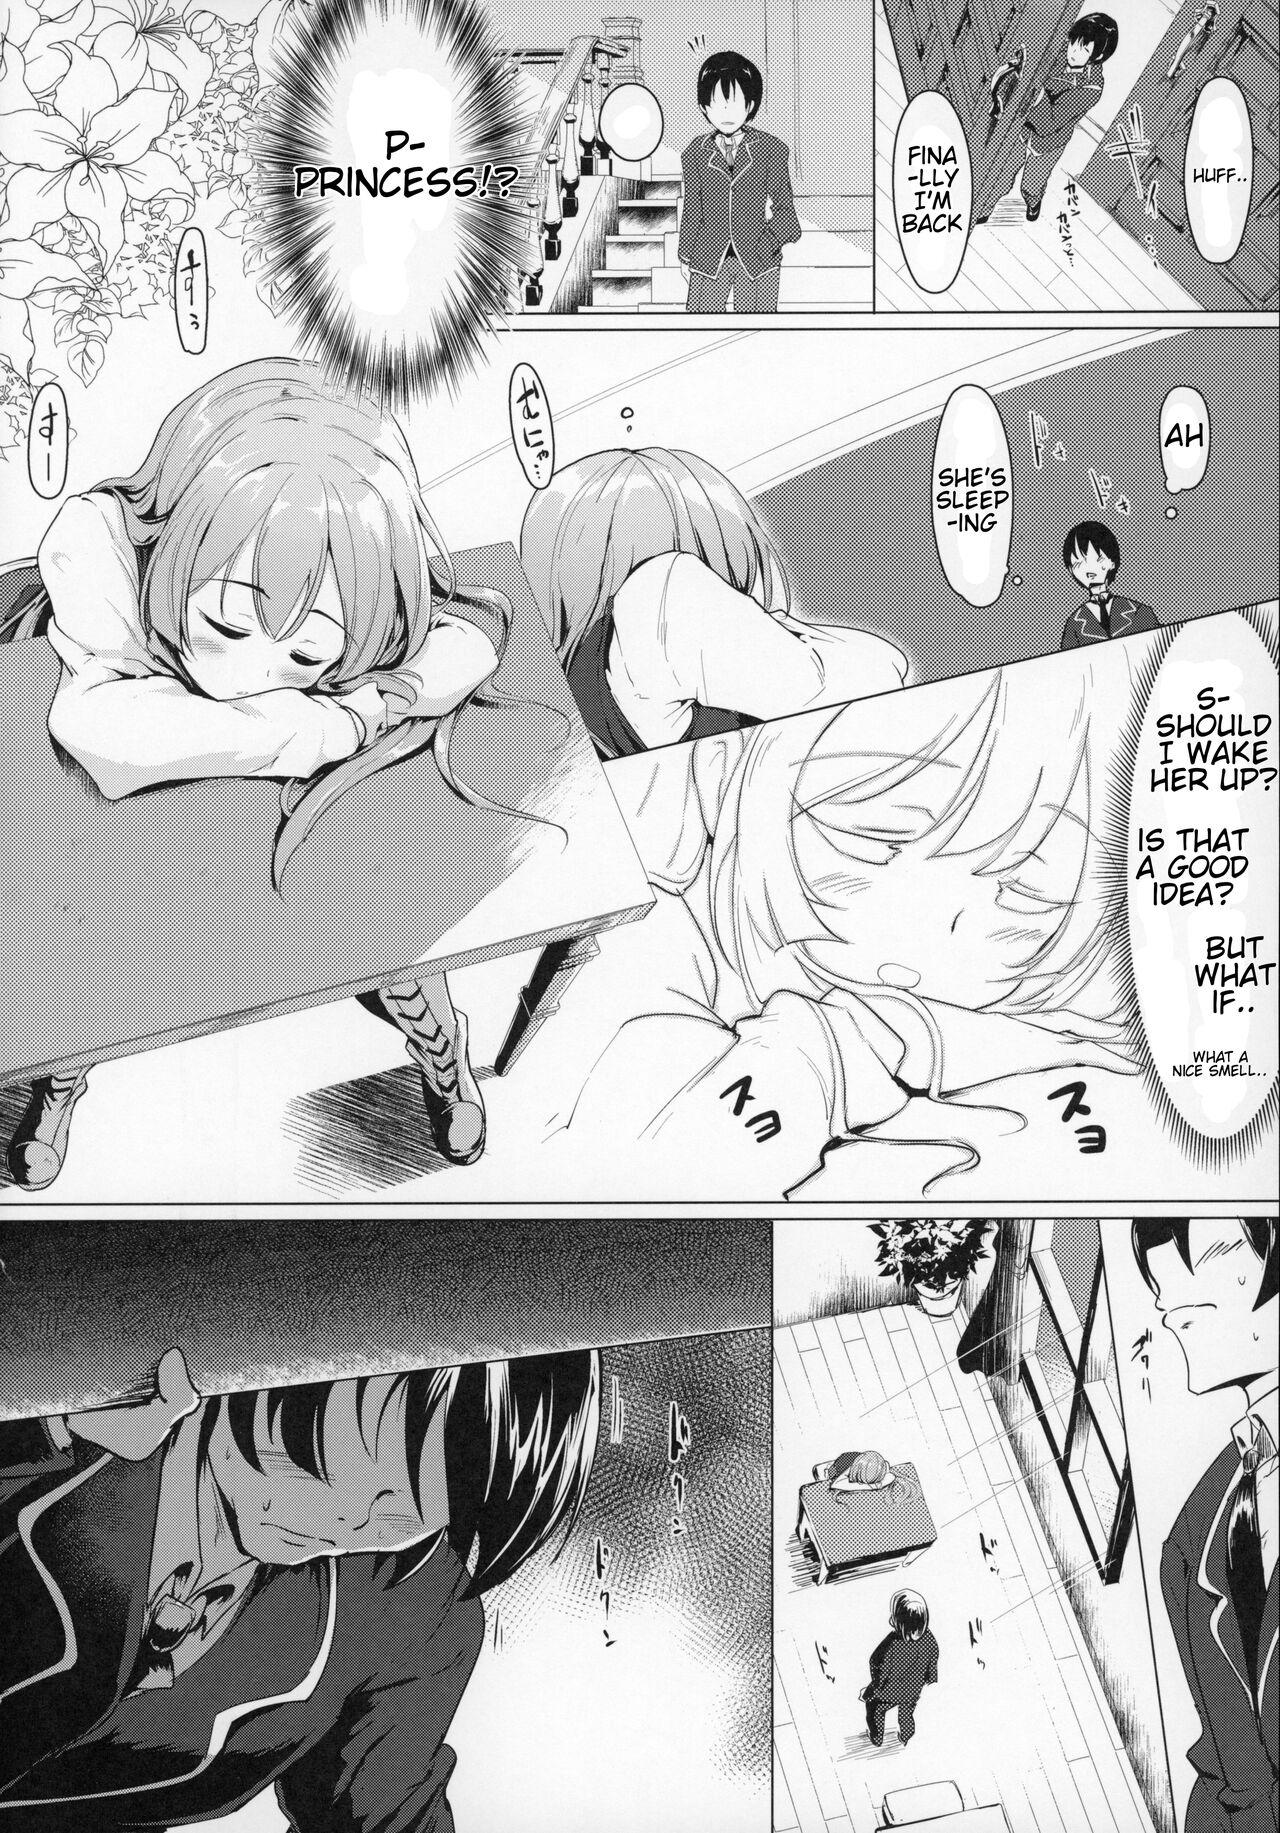 Women Sucking There's No Way An Ecchi Event Will Happen Between Me and the Princess of Manaria Kingdom! - Manaria friends Amature Porn - Page 7